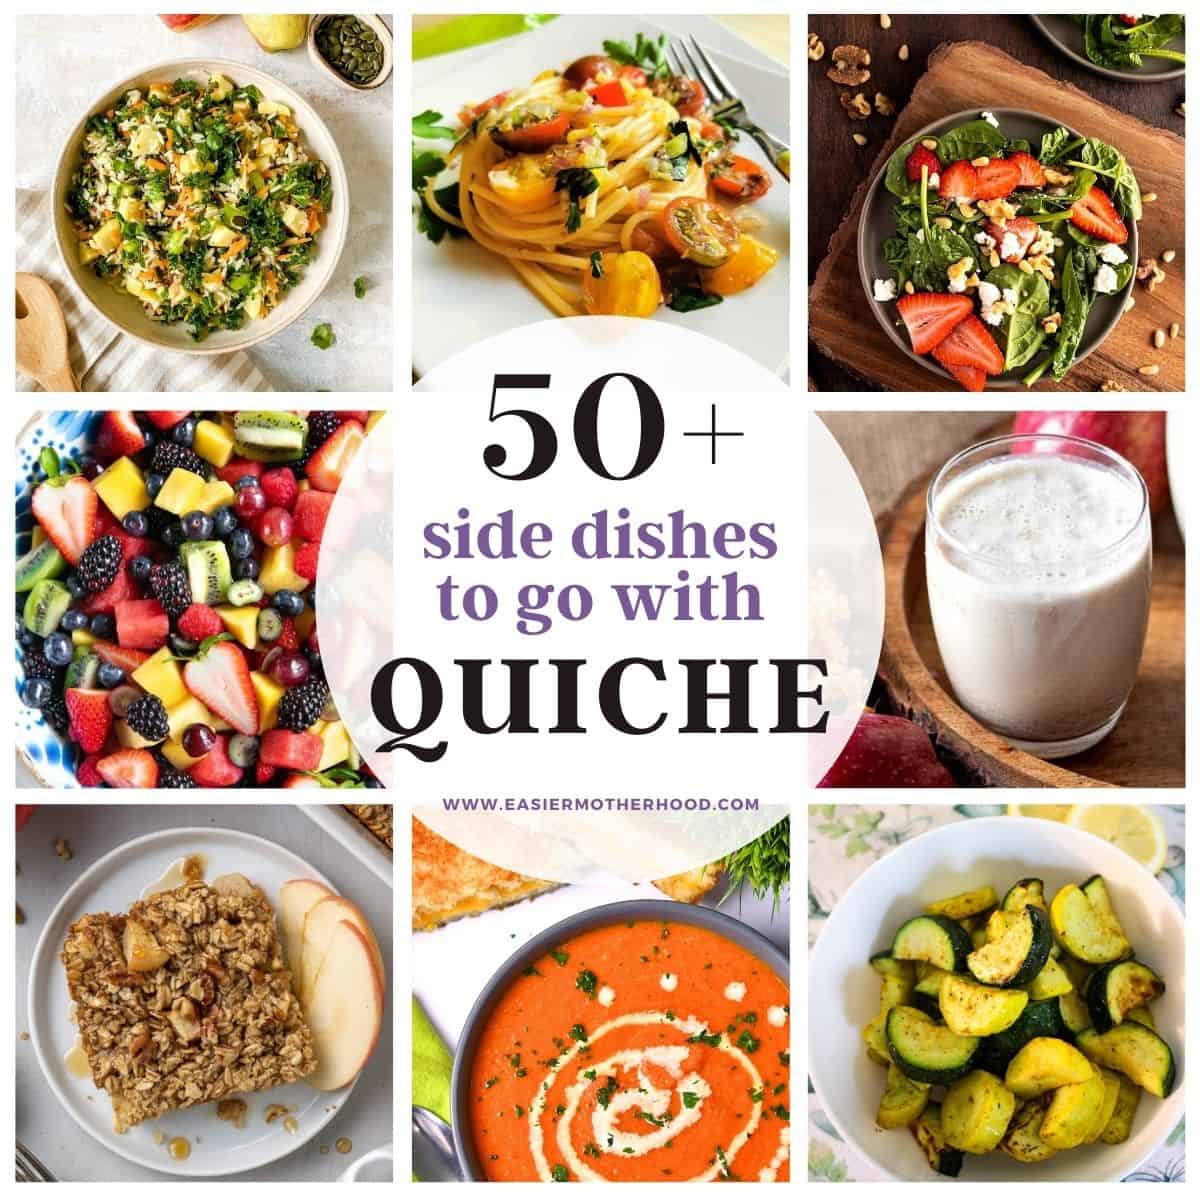 8 square images around middle text that reads "50+ side dishes to go with quiche"